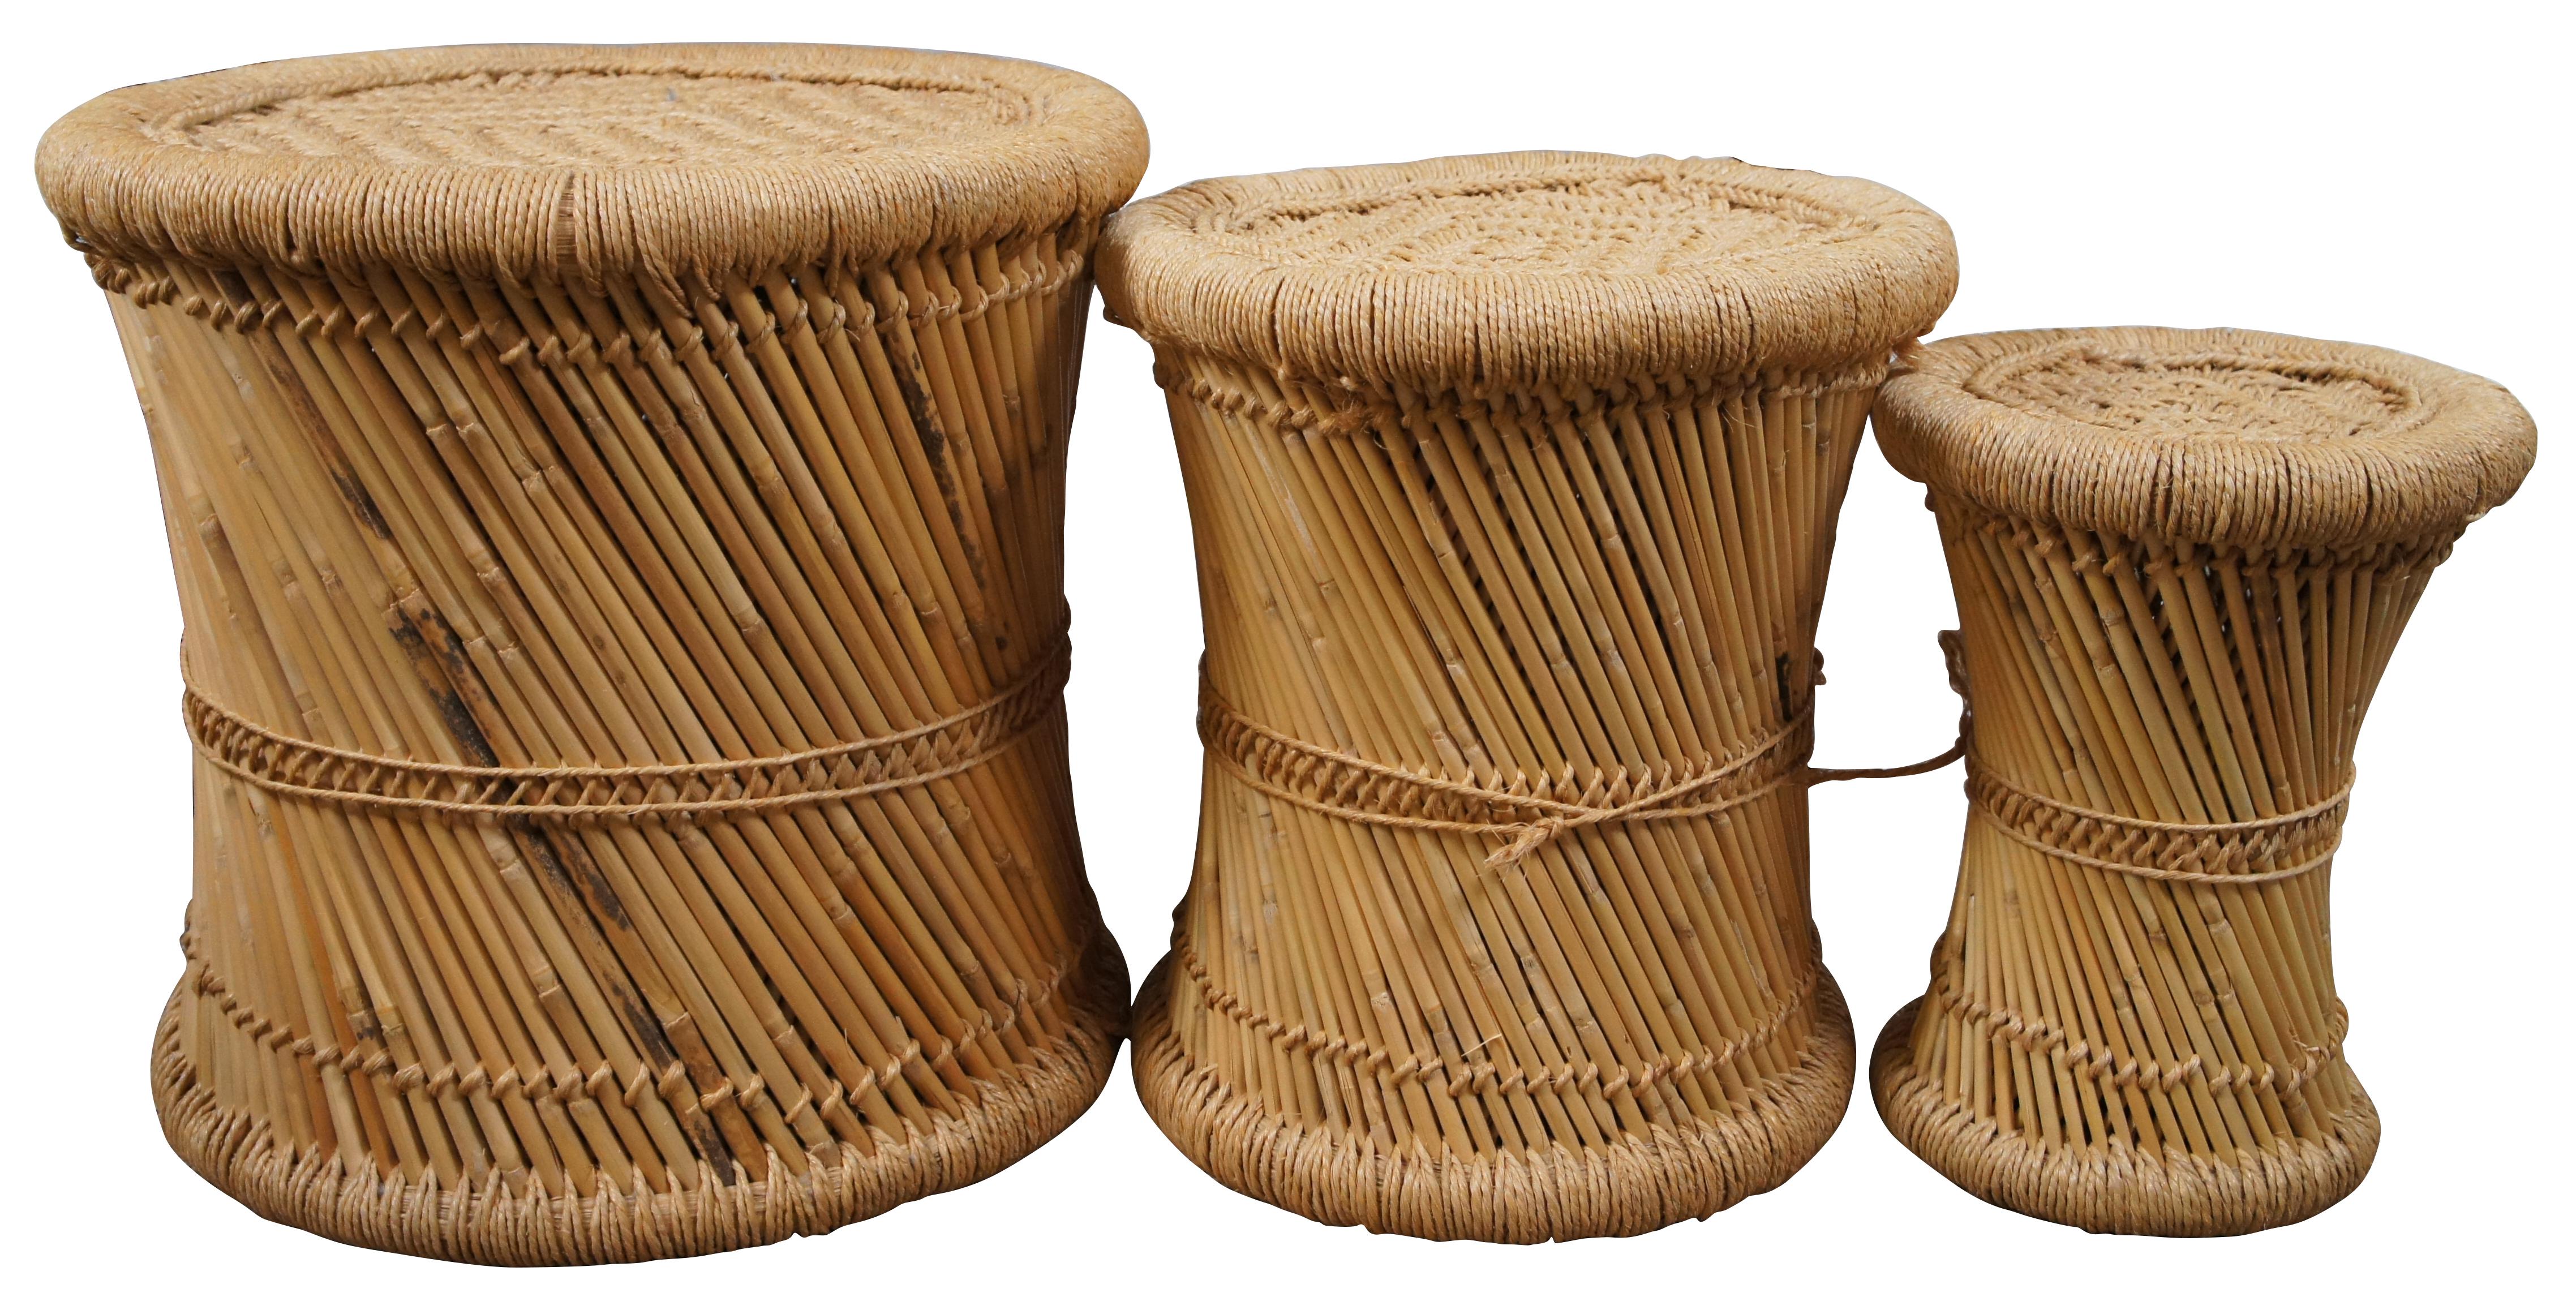 Set of three vintage circa 1970’s round end tables or stools made of cane / bamboo with a pinched waist, spirals design, finished with wrapped sisal / jute cord edges and diamond woven tops. Hollow base, can nest together.

Large - 17” x 16.5” /